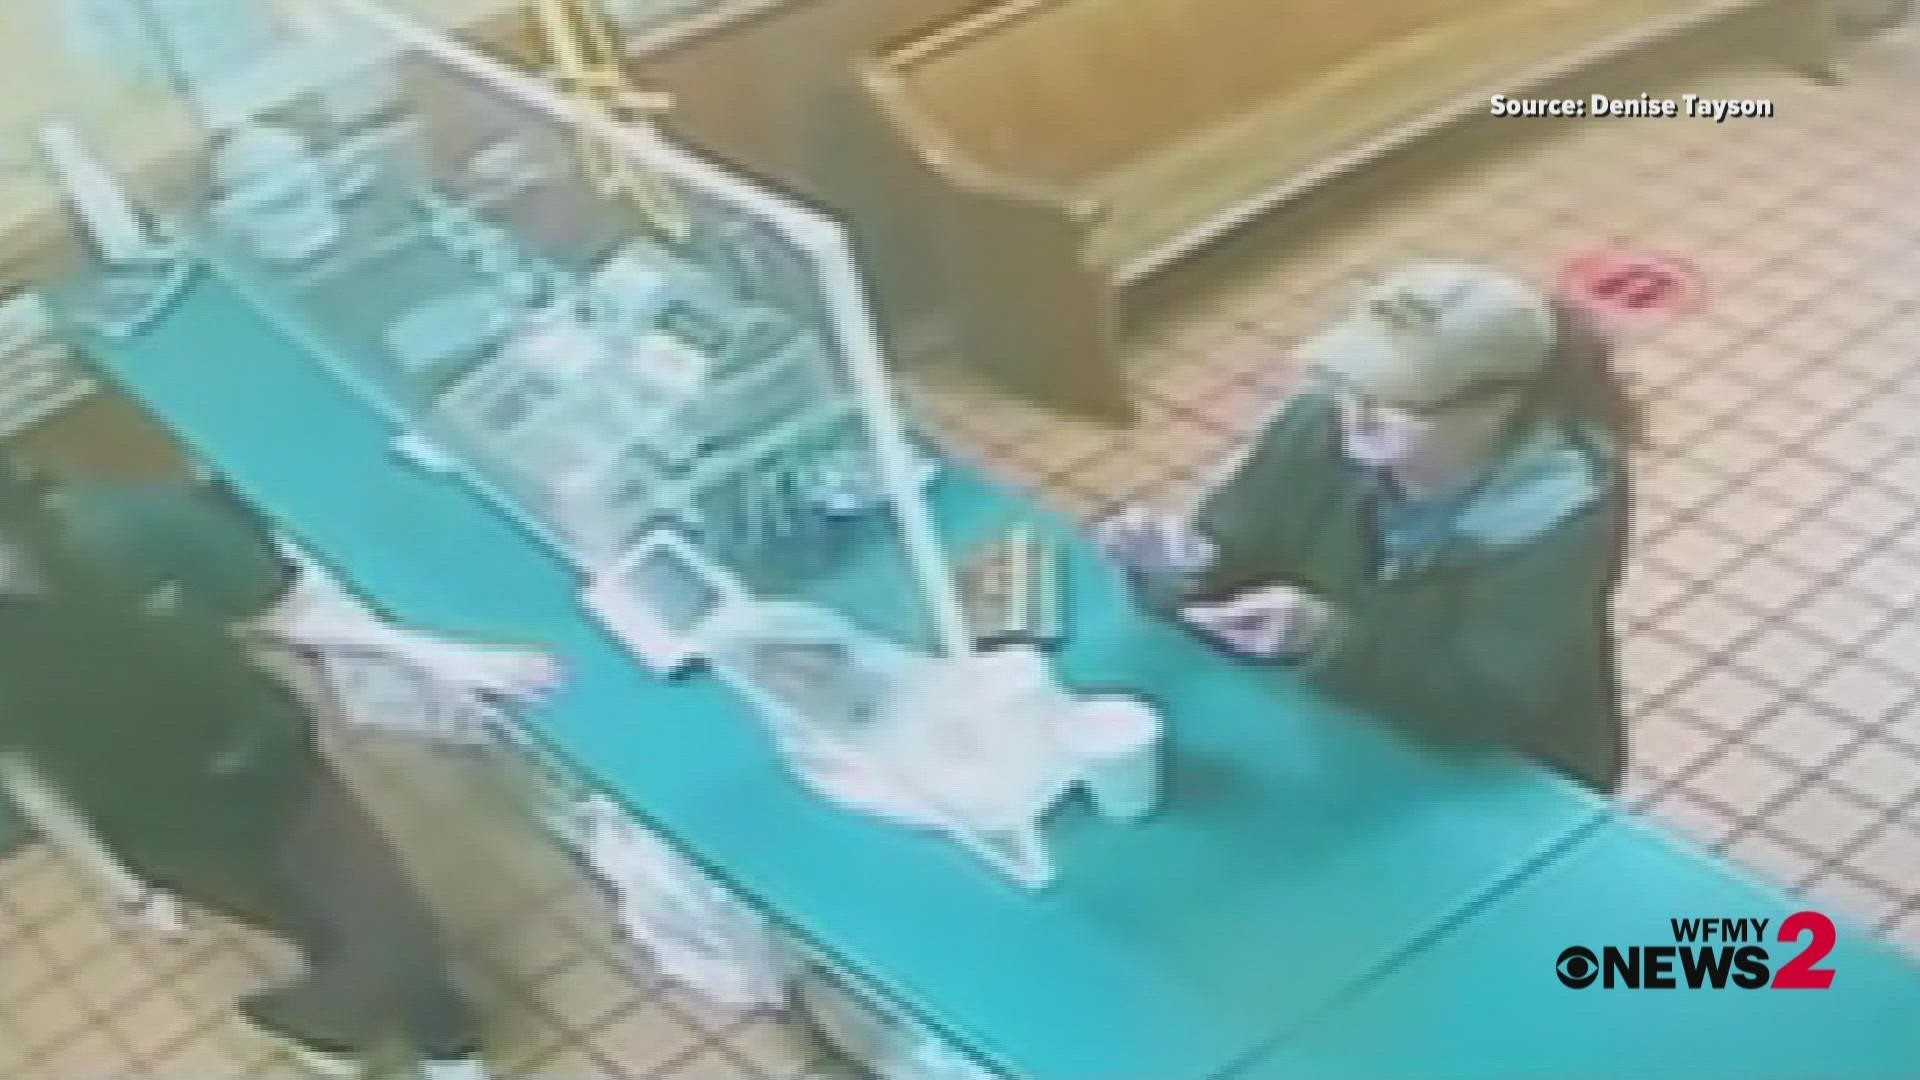 Video shows a customer tossing hot soup across the restaurant counter at a teenage employee at the Rural Hall Mayflower.